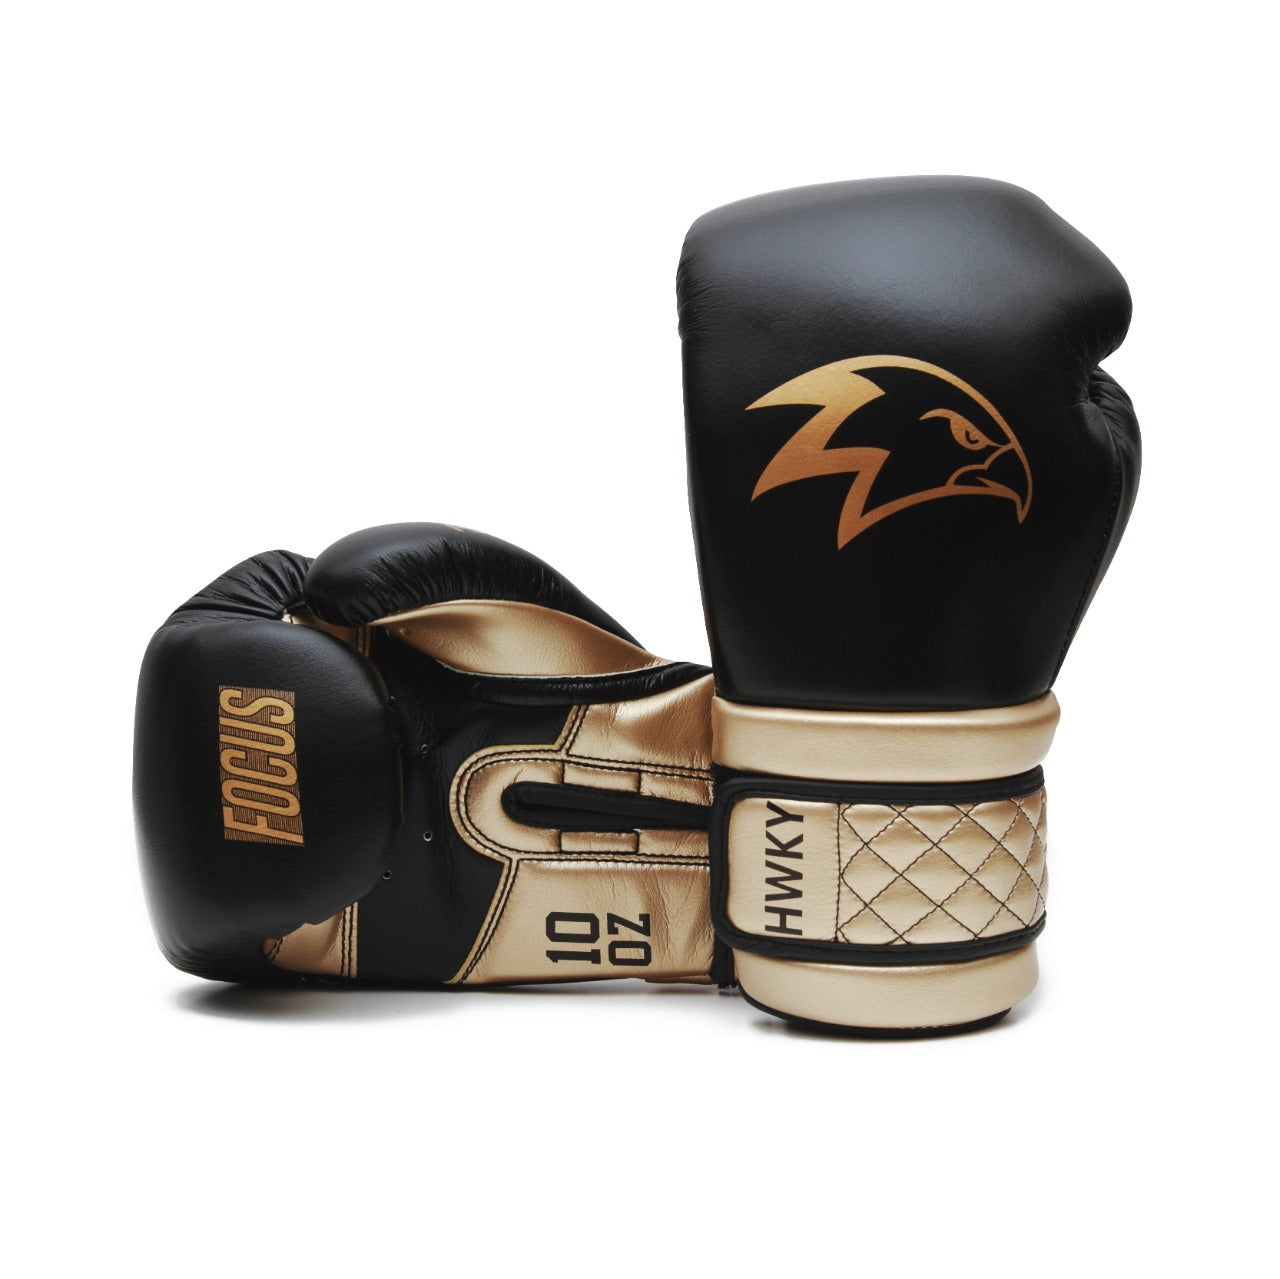 Focus Boxing Gloves | Onyx Gold + FREE Mystery Gift